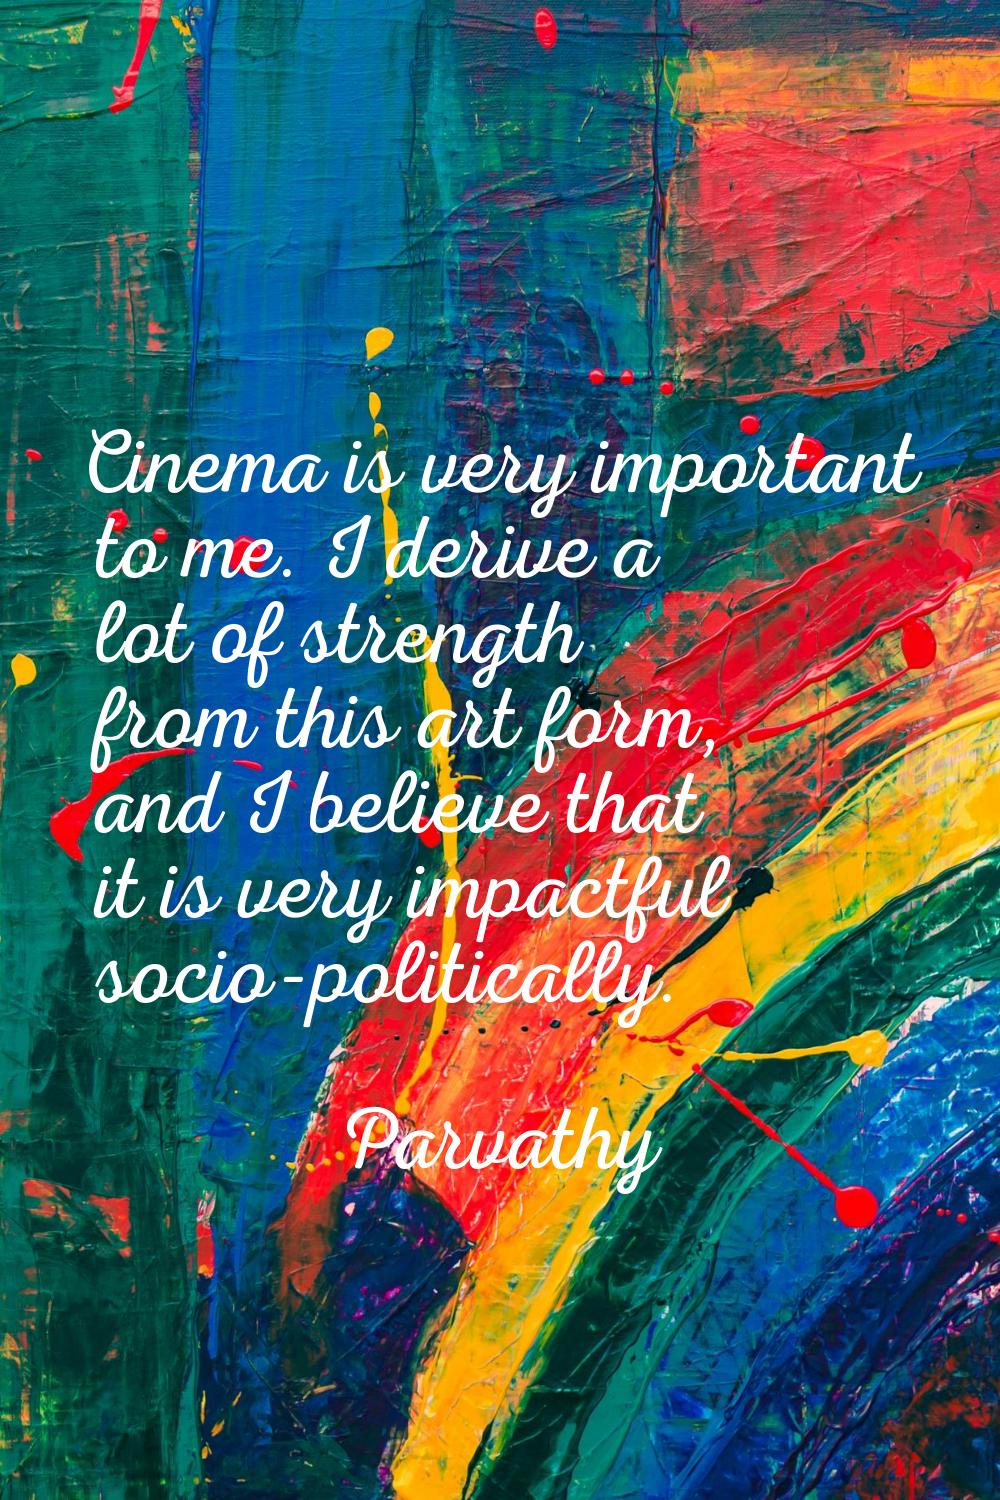 Cinema is very important to me. I derive a lot of strength from this art form, and I believe that i